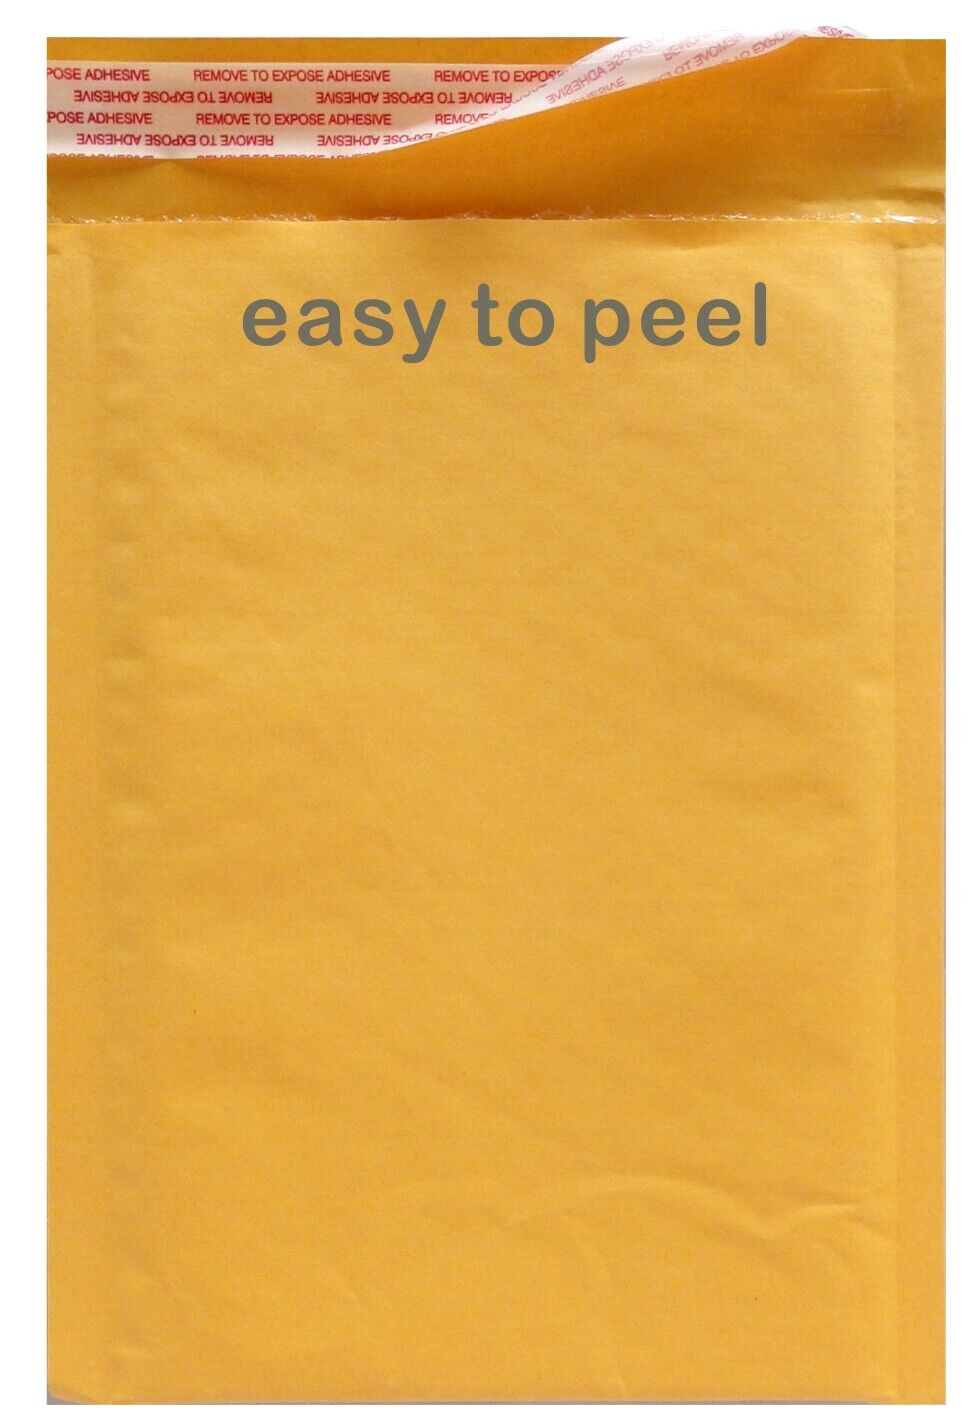 Poly1000pcs#000Kraft Bubble Envelopes Mailers(Inner 4x7)(Economy Quality-Thinner